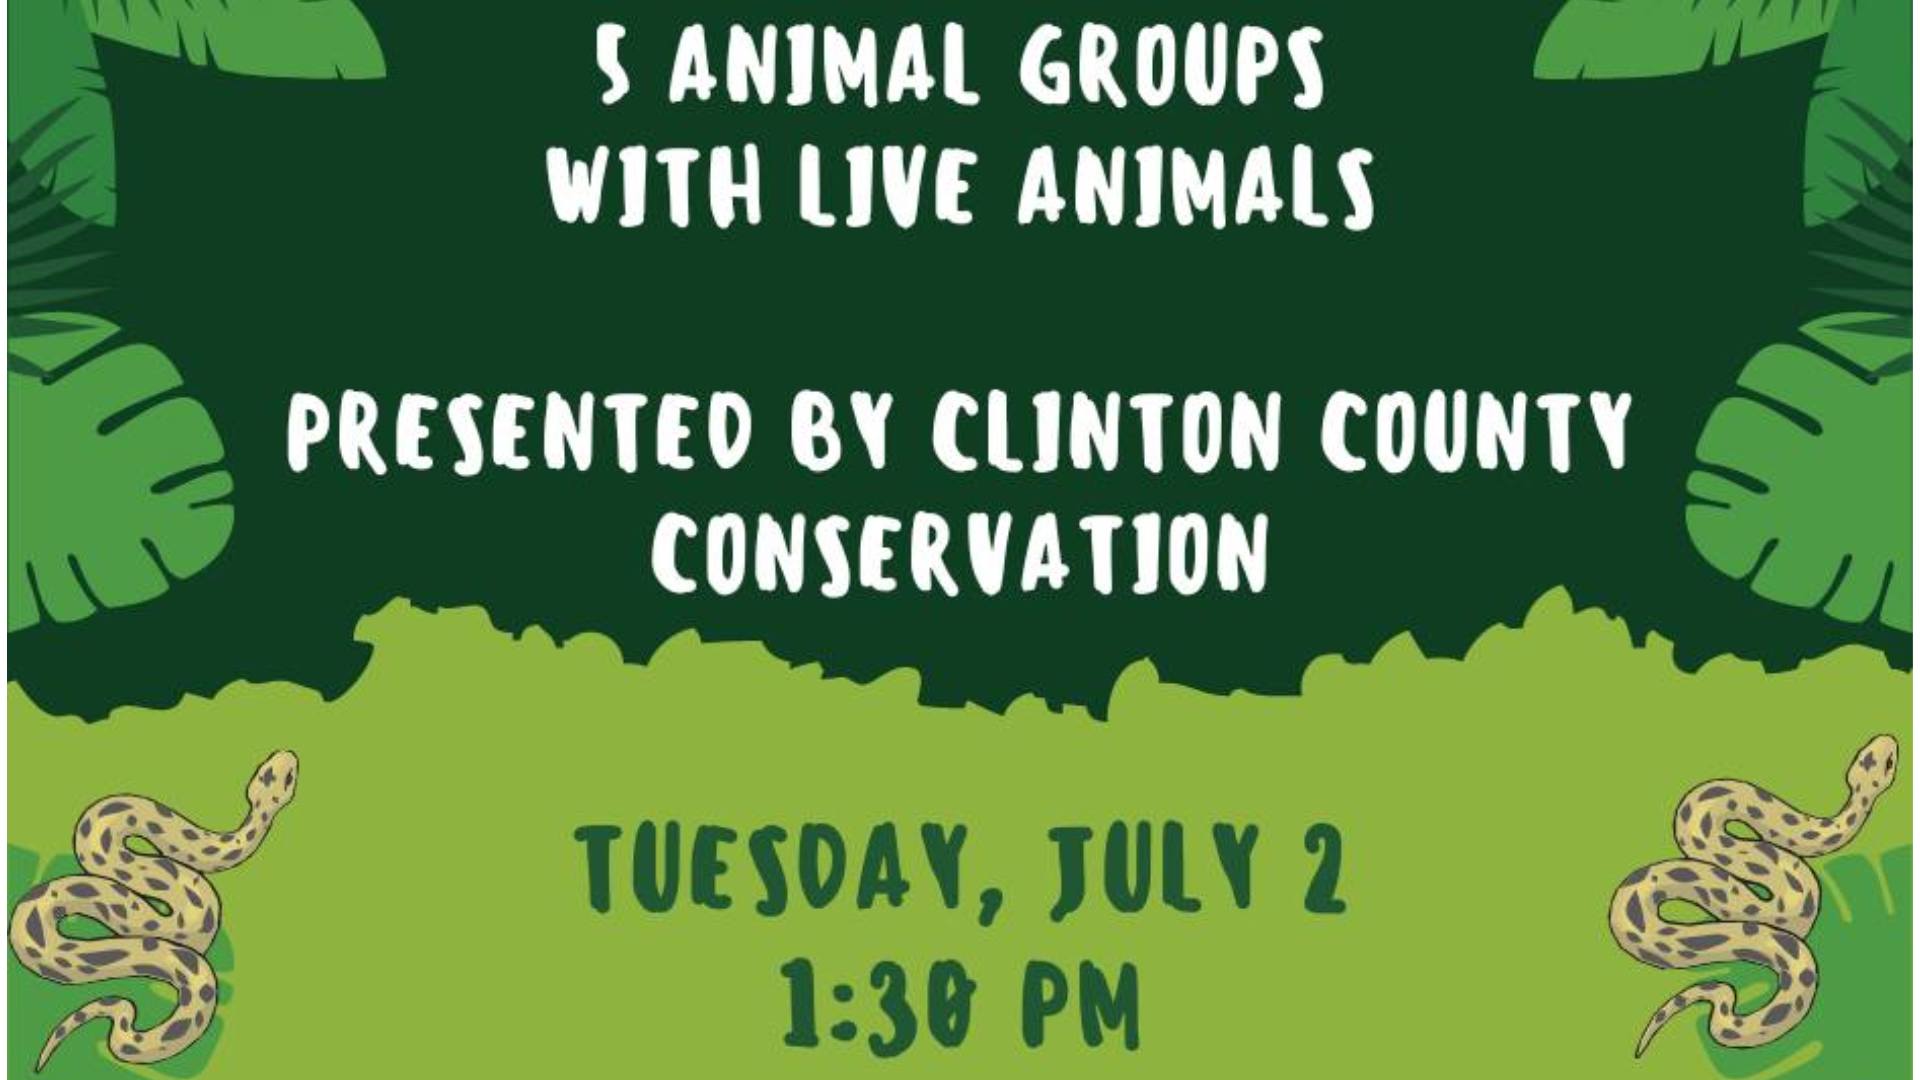 5 Animal Groups with Live Animals Presented by Clinton County Conservation Tuesday, July 2 1:30 pm